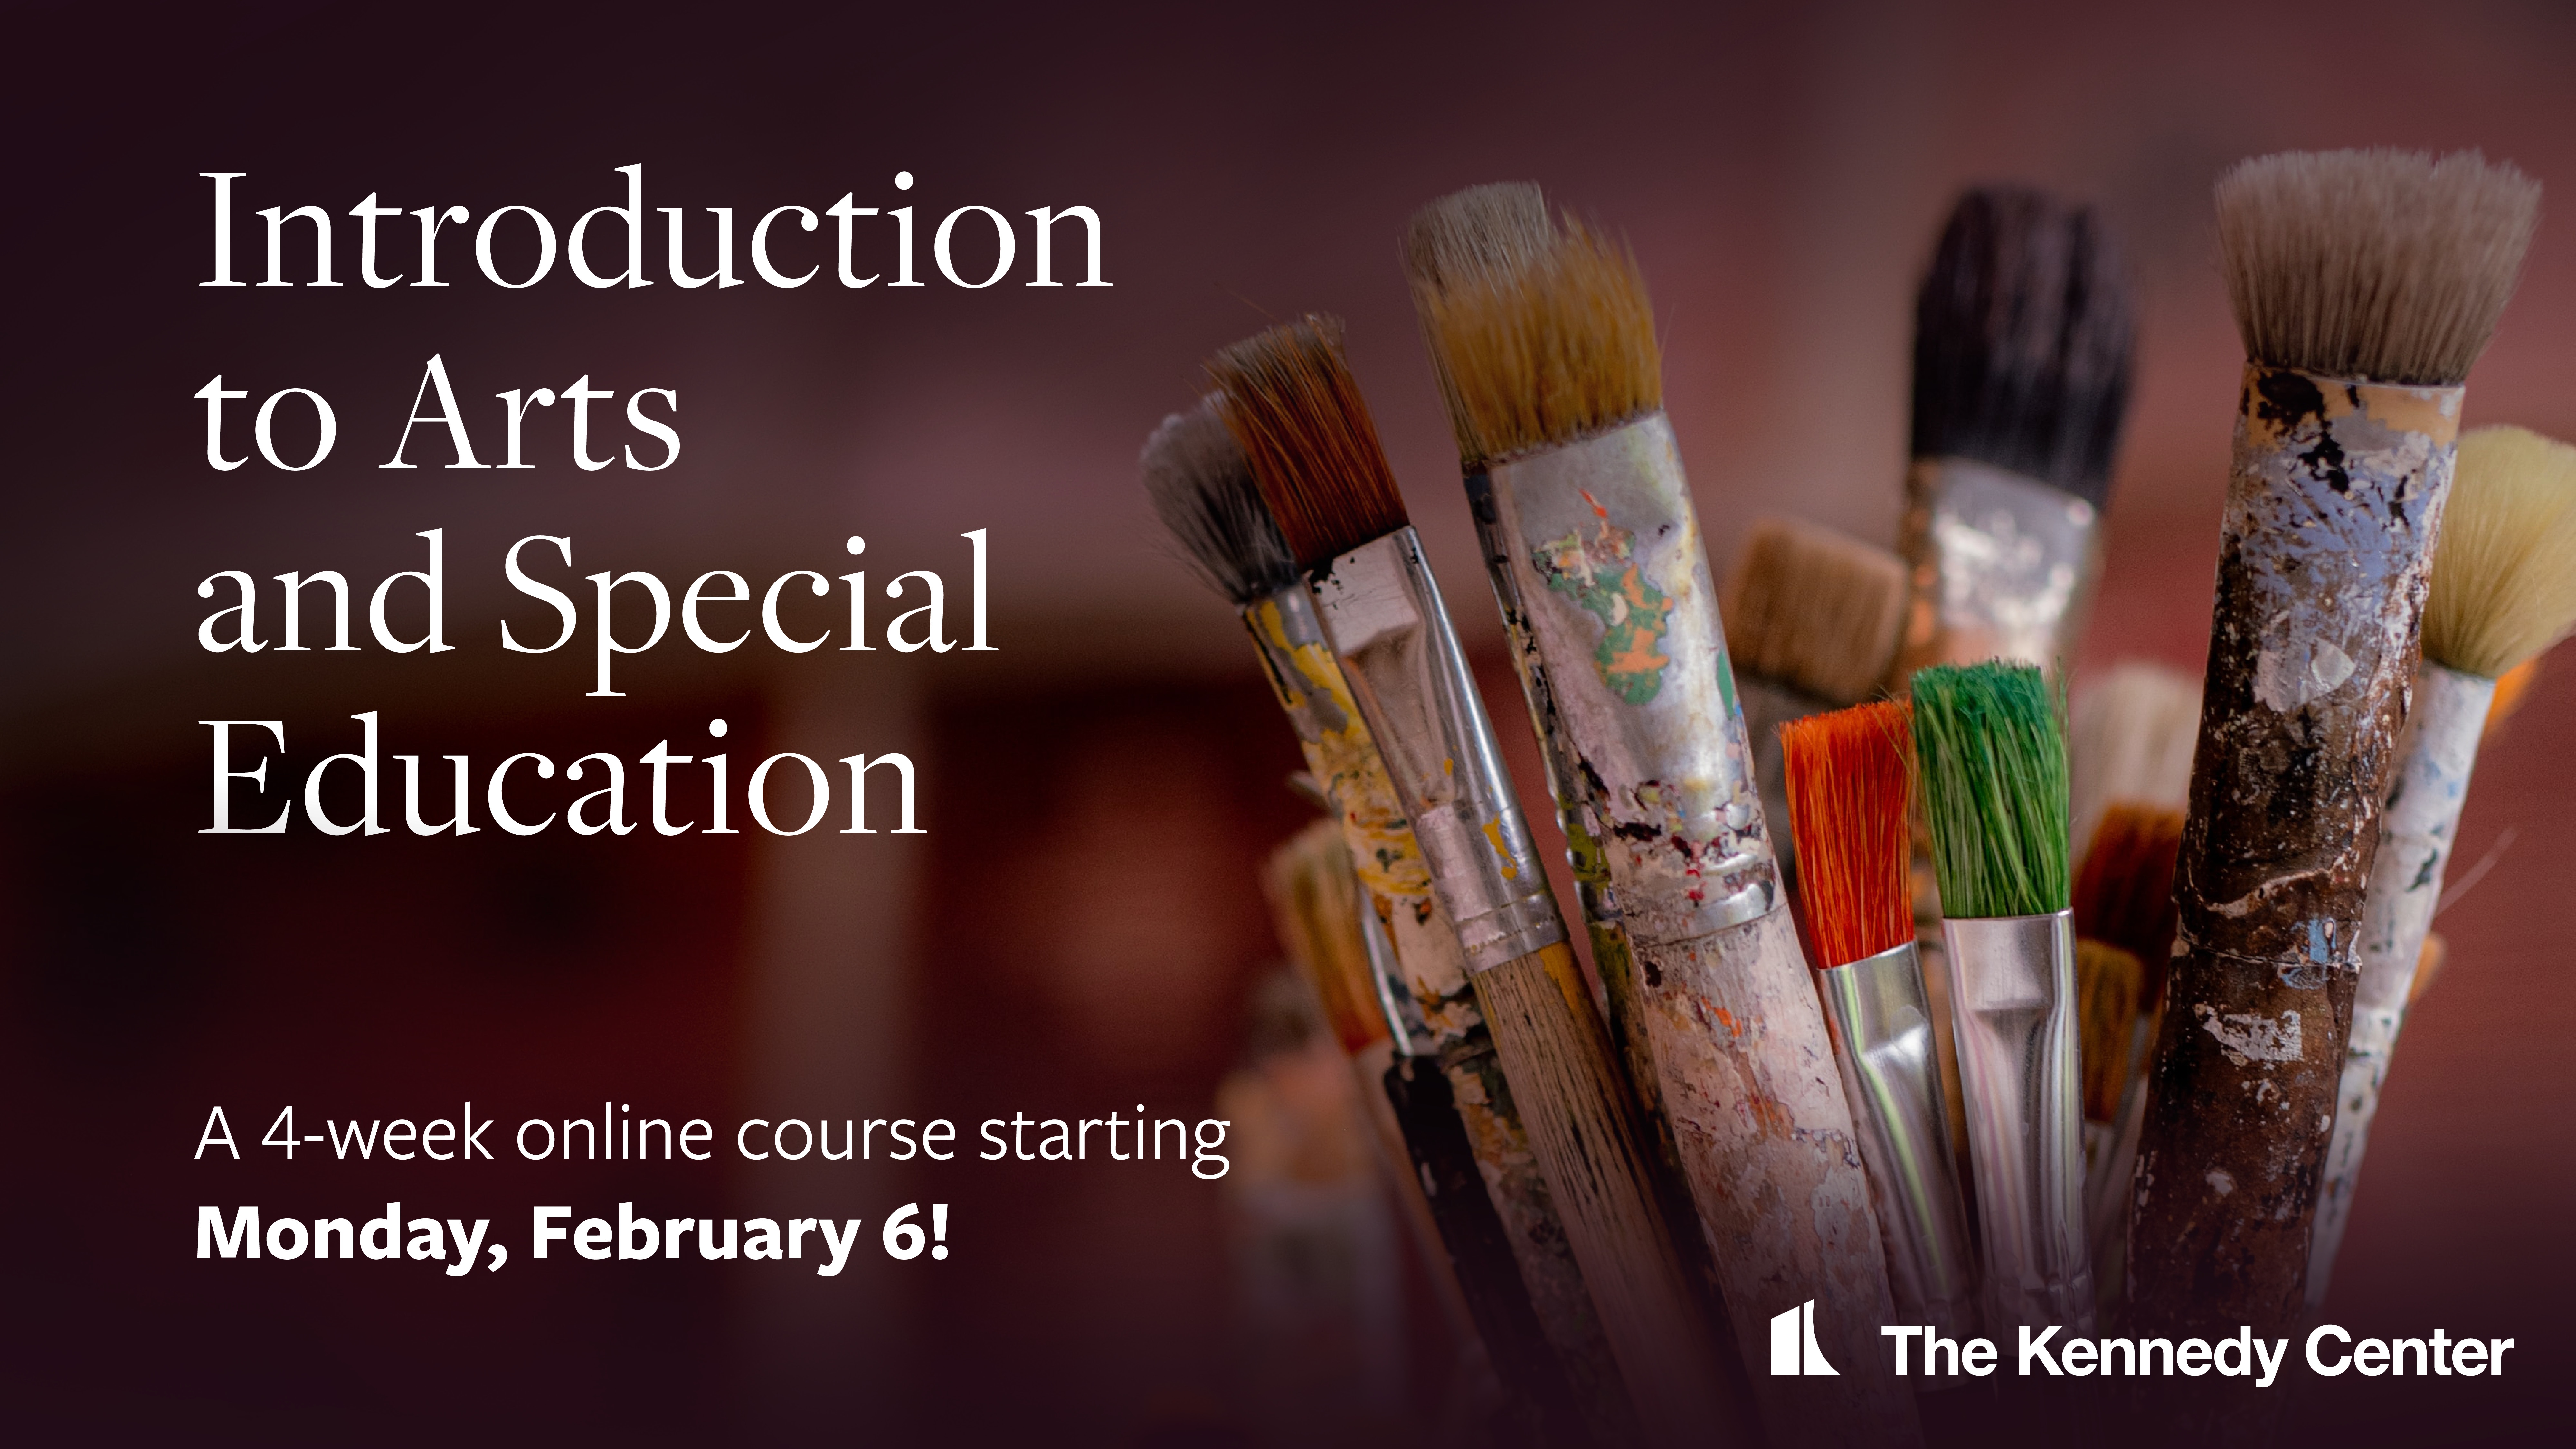 Image of paintbrushes and the text "Introduction to Arts and Special Education."